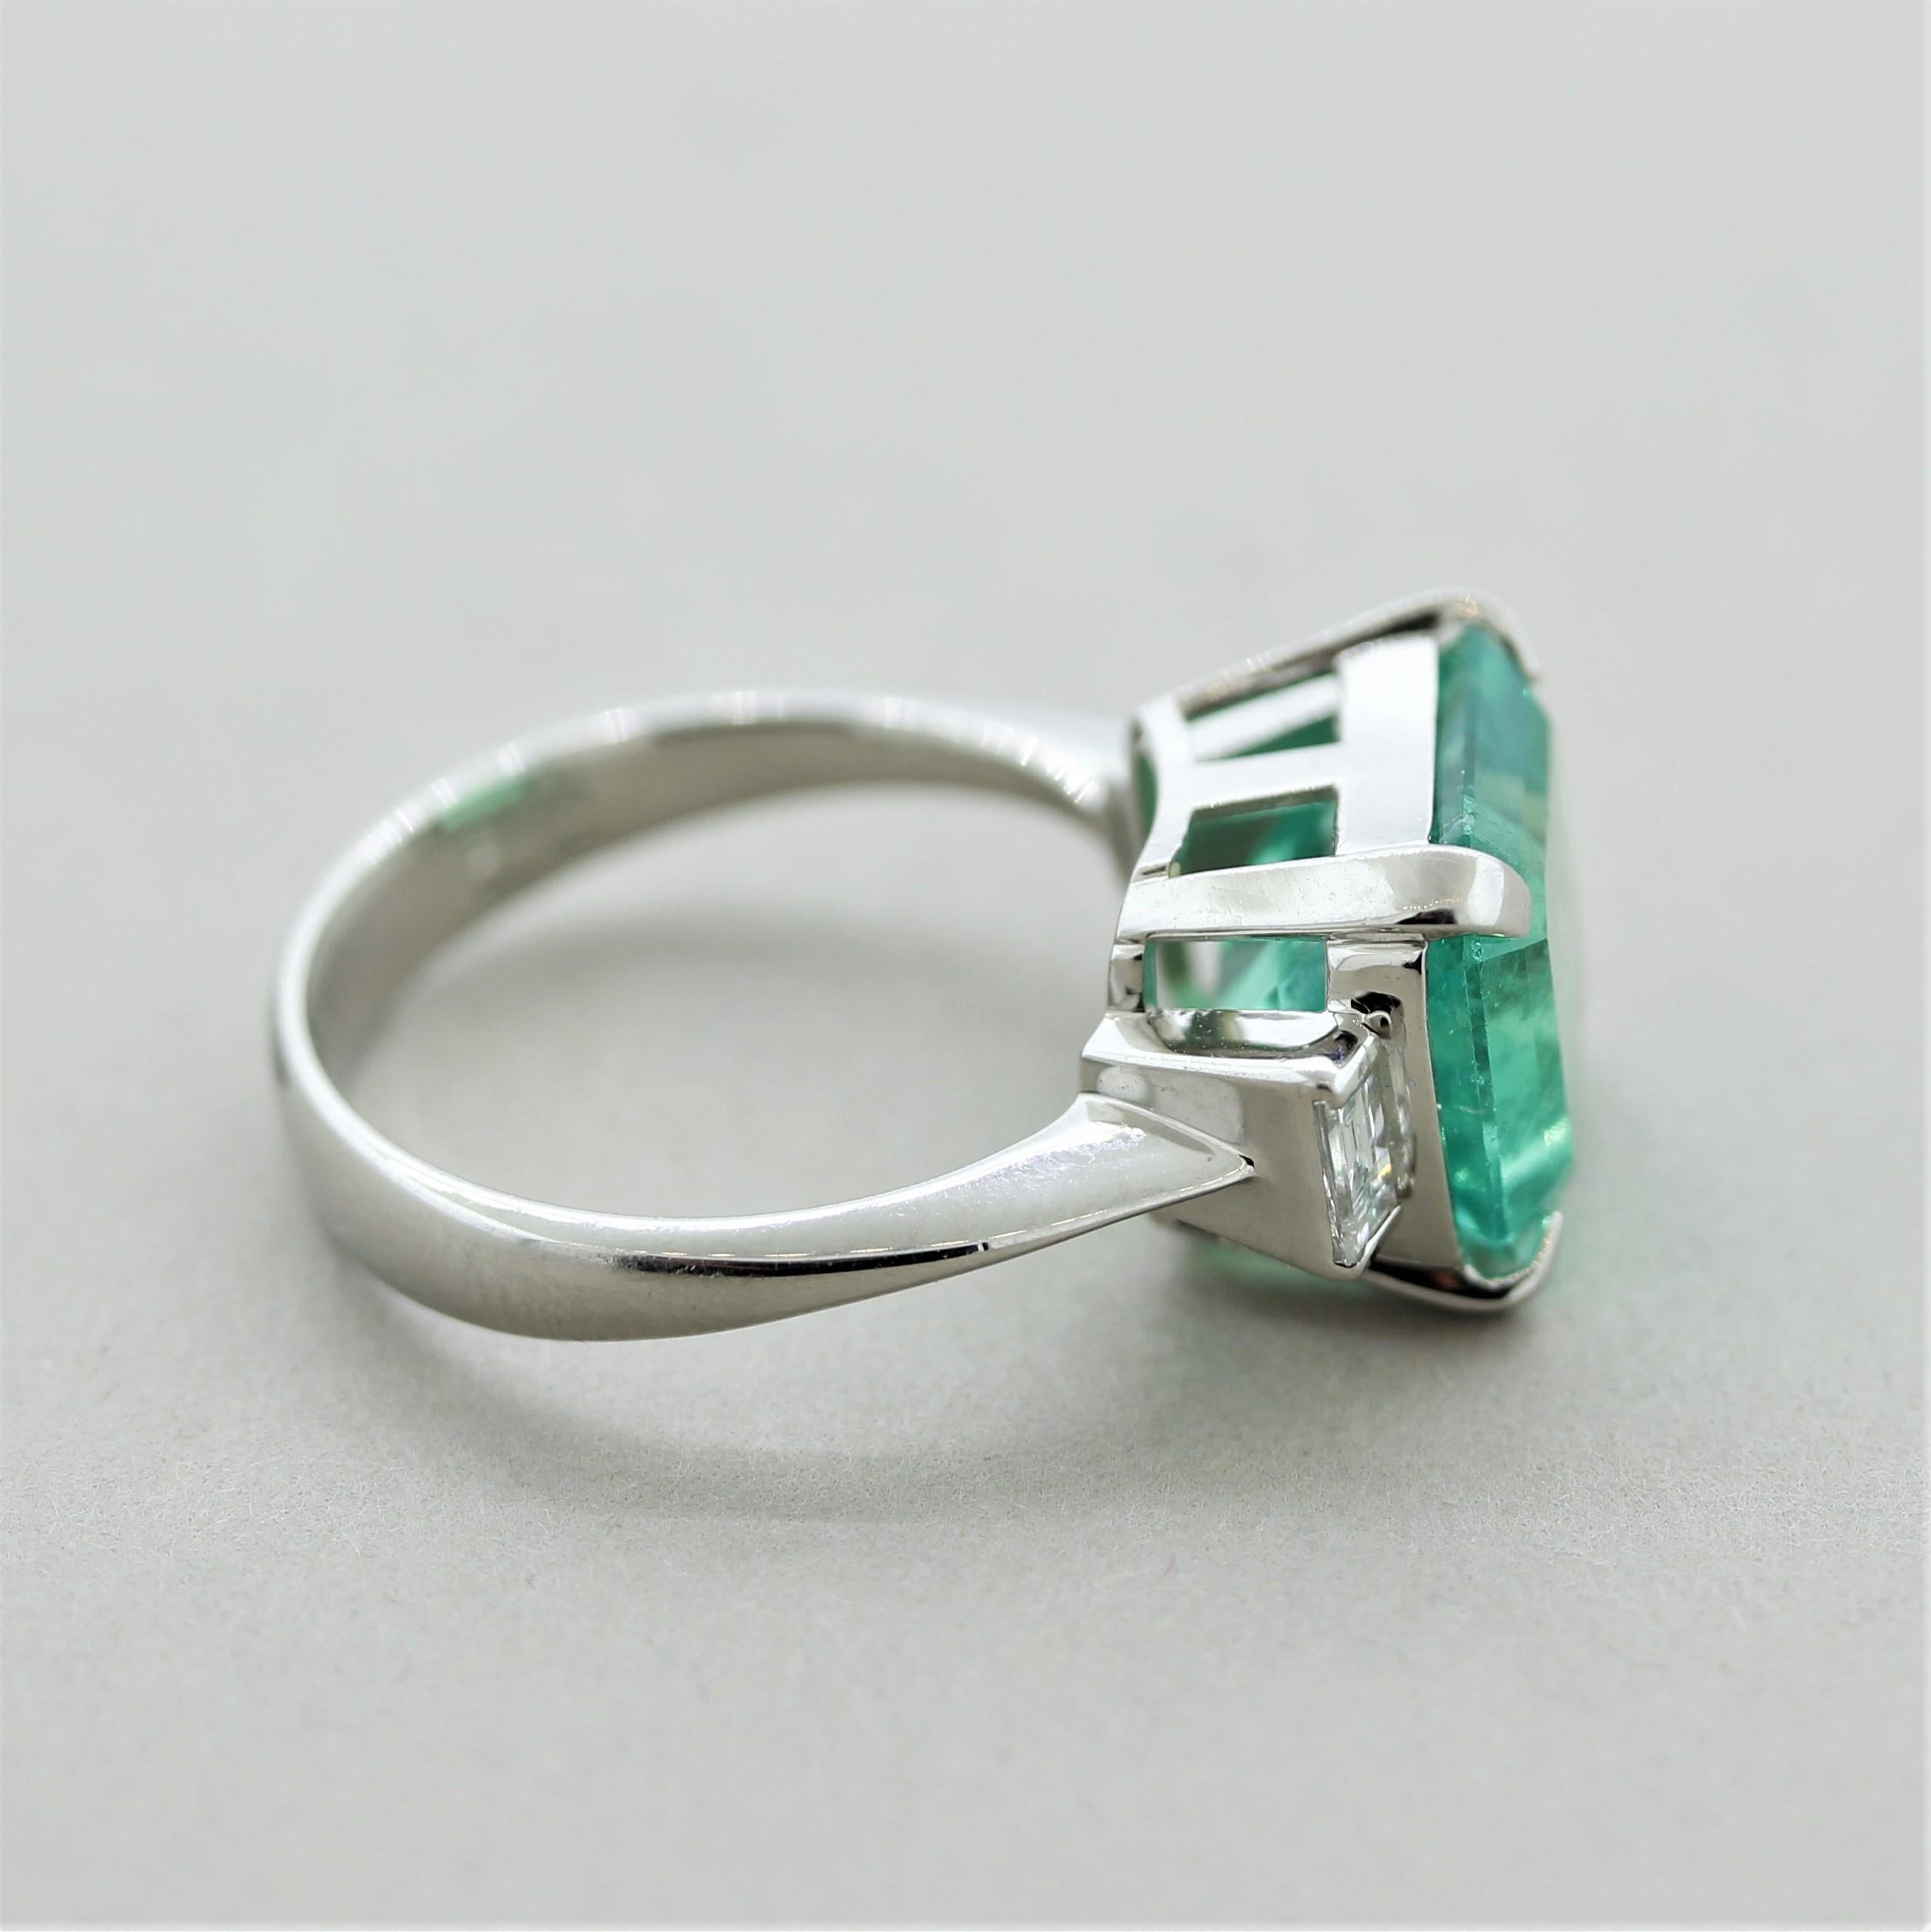 5.43 Carat Colombian Emerald Diamond Platinum Ring, GIA Certified For Sale 3